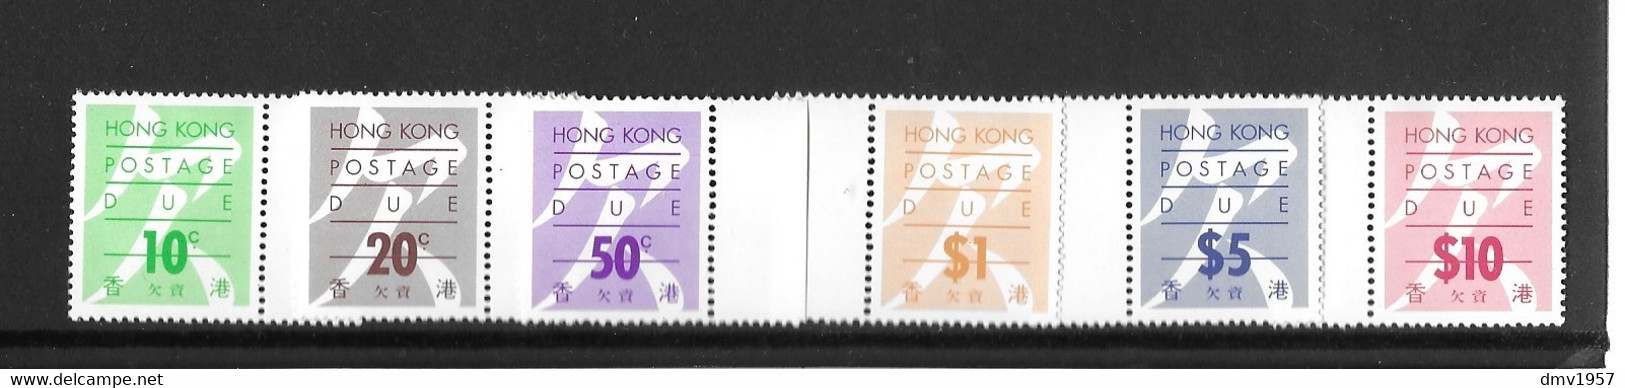 Hong Kong 1987 MNH Postage Dues D31/6 - Postage Due